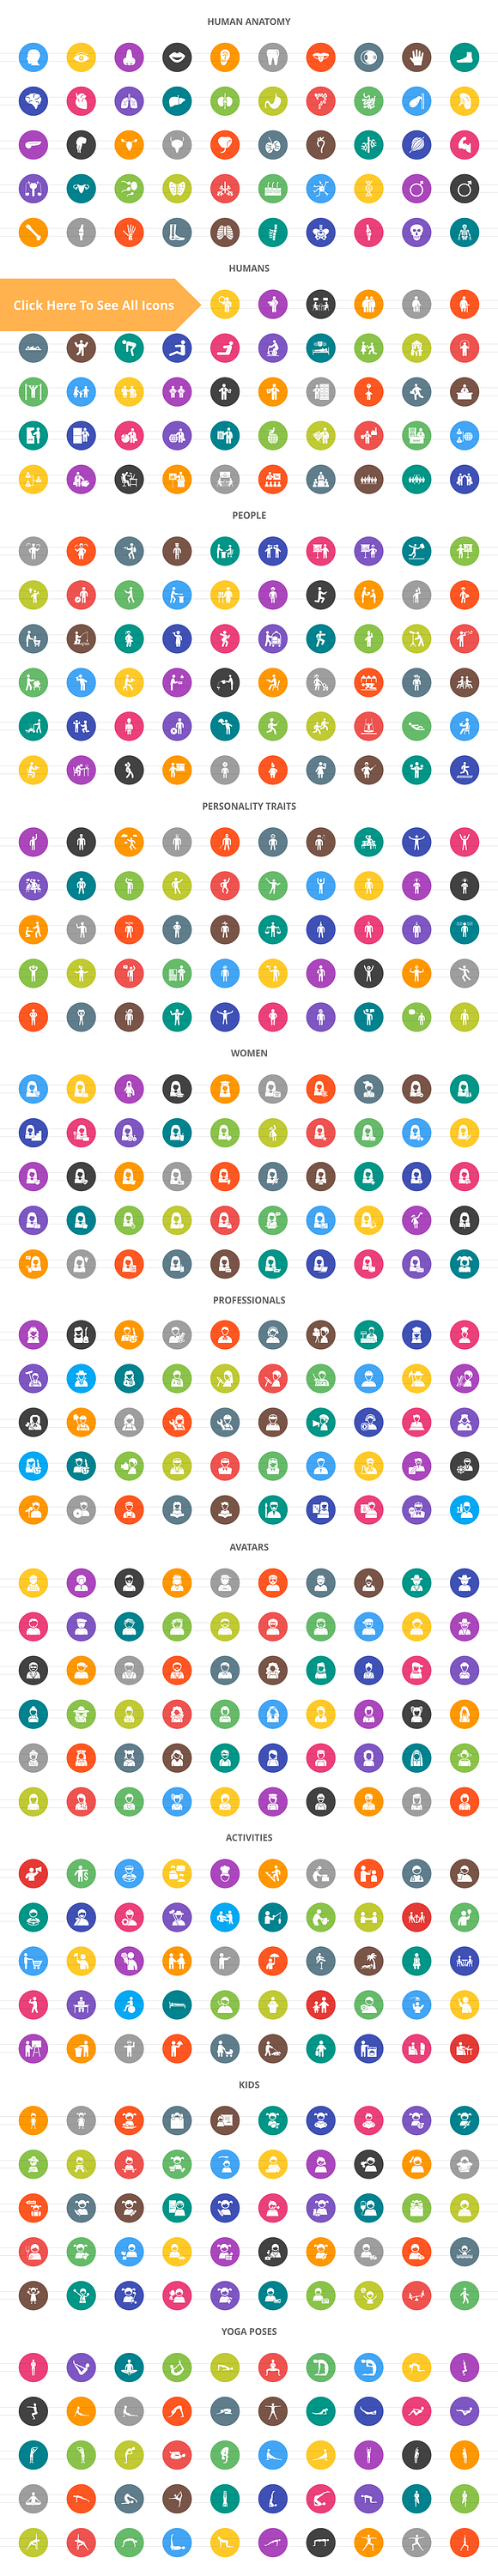 520 People Filled Round Icons in Icons - product preview 1